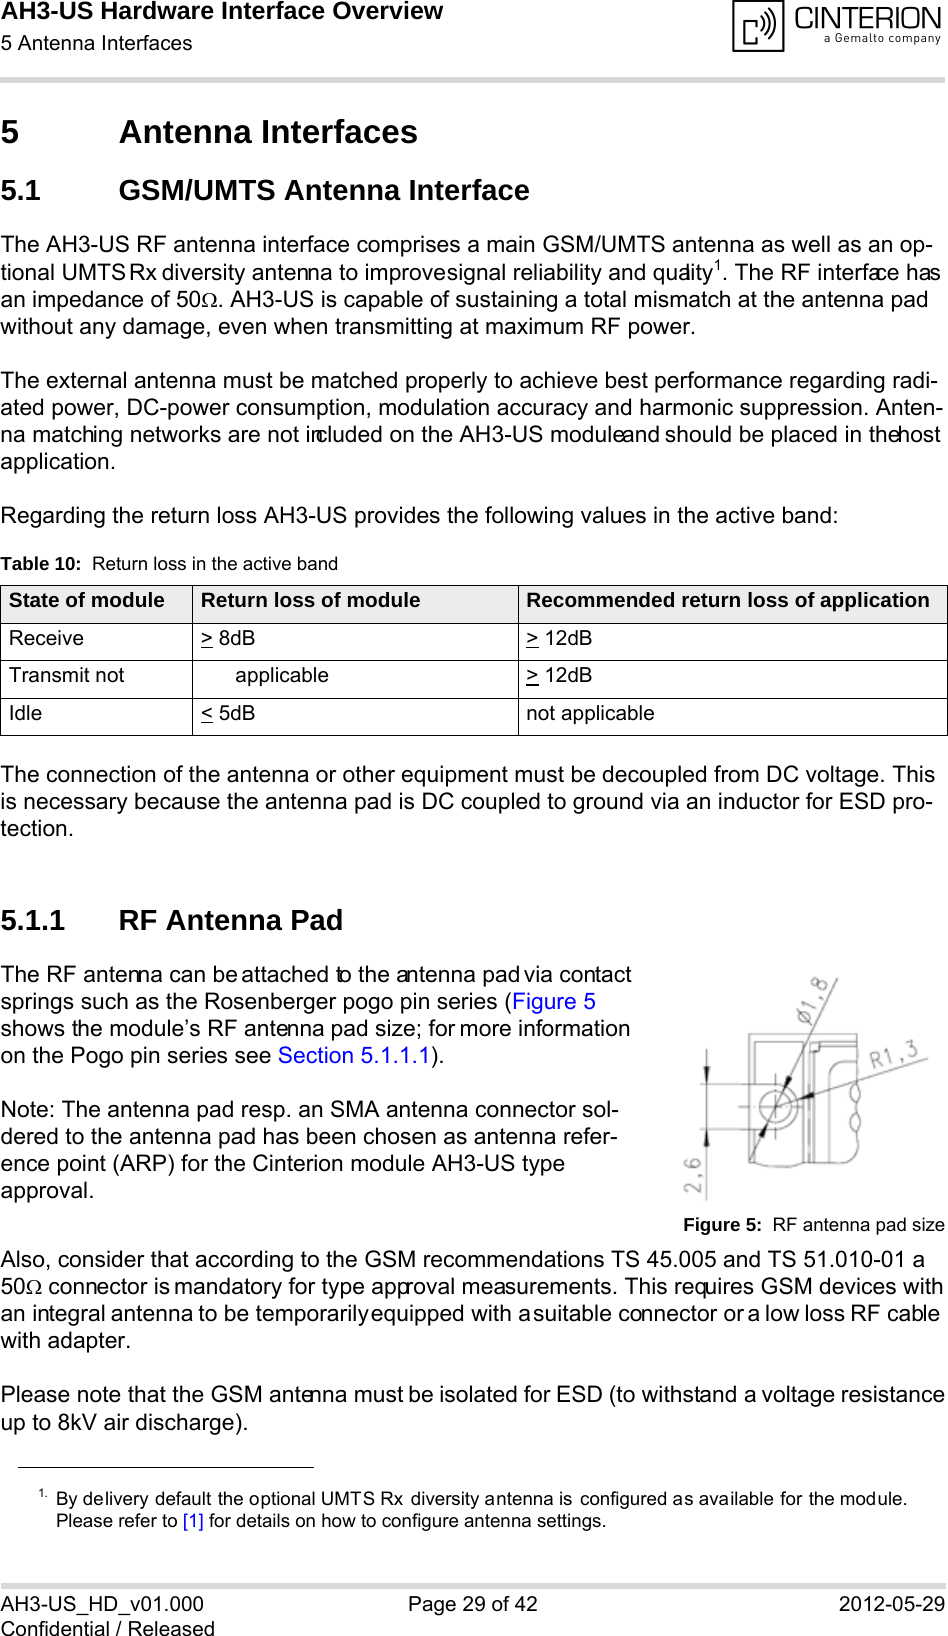 AH3-US Hardware Interface Overview5 Antenna Interfaces32AH3-US_HD_v01.000 Page 29 of 42 2012-05-29Confidential / Released5 Antenna Interfaces5.1 GSM/UMTS Antenna InterfaceThe AH3-US RF antenna interface comprises a main GSM/UMTS antenna as well as an op-tional UMTS Rx diversity antenna to improve signal reliability and quality1. The RF interface has an impedance of 50. AH3-US is capable of sustaining a total mismatch at the antenna pad without any damage, even when transmitting at maximum RF power.The external antenna must be matched properly to achieve best performance regarding radi-ated power, DC-power consumption, modulation accuracy and harmonic suppression. Anten-na matching networks are not included on the AH3-US module and should be placed in the host application. Regarding the return loss AH3-US provides the following values in the active band:The connection of the antenna or other equipment must be decoupled from DC voltage. This is necessary because the antenna pad is DC coupled to ground via an inductor for ESD pro-tection.5.1.1 RF Antenna PadThe RF antenna can be attached to the antenna pad via contact springs such as the Rosenberger pogo pin series (Figure 5 shows the module’s RF antenna pad size; for more information on the Pogo pin series see Section 5.1.1.1). Note: The antenna pad resp. an SMA antenna connector sol-dered to the antenna pad has been chosen as antenna refer-ence point (ARP) for the Cinterion module AH3-US type approval.Figure 5:  RF antenna pad sizeAlso, consider that according to the GSM recommendations TS 45.005 and TS 51.010-01 a 50 connector is mandatory for type approval measurements. This requires GSM devices with an integral antenna to be temporarily equipped with a suitable connector or a low loss RF cable with adapter.Please note that the GSM antenna must be isolated for ESD (to withstand a voltage resistanceup to 8kV air discharge).1. By delivery default the optional UMTS Rx diversity antenna is configured as available for the module.Please refer to [1] for details on how to configure antenna settings.Table 10:  Return loss in the active bandState of module Return loss of module Recommended return loss of applicationReceive &gt; 8dB &gt; 12dBTransmit not applicable  &gt; 12dBIdle &lt; 5dB not applicable